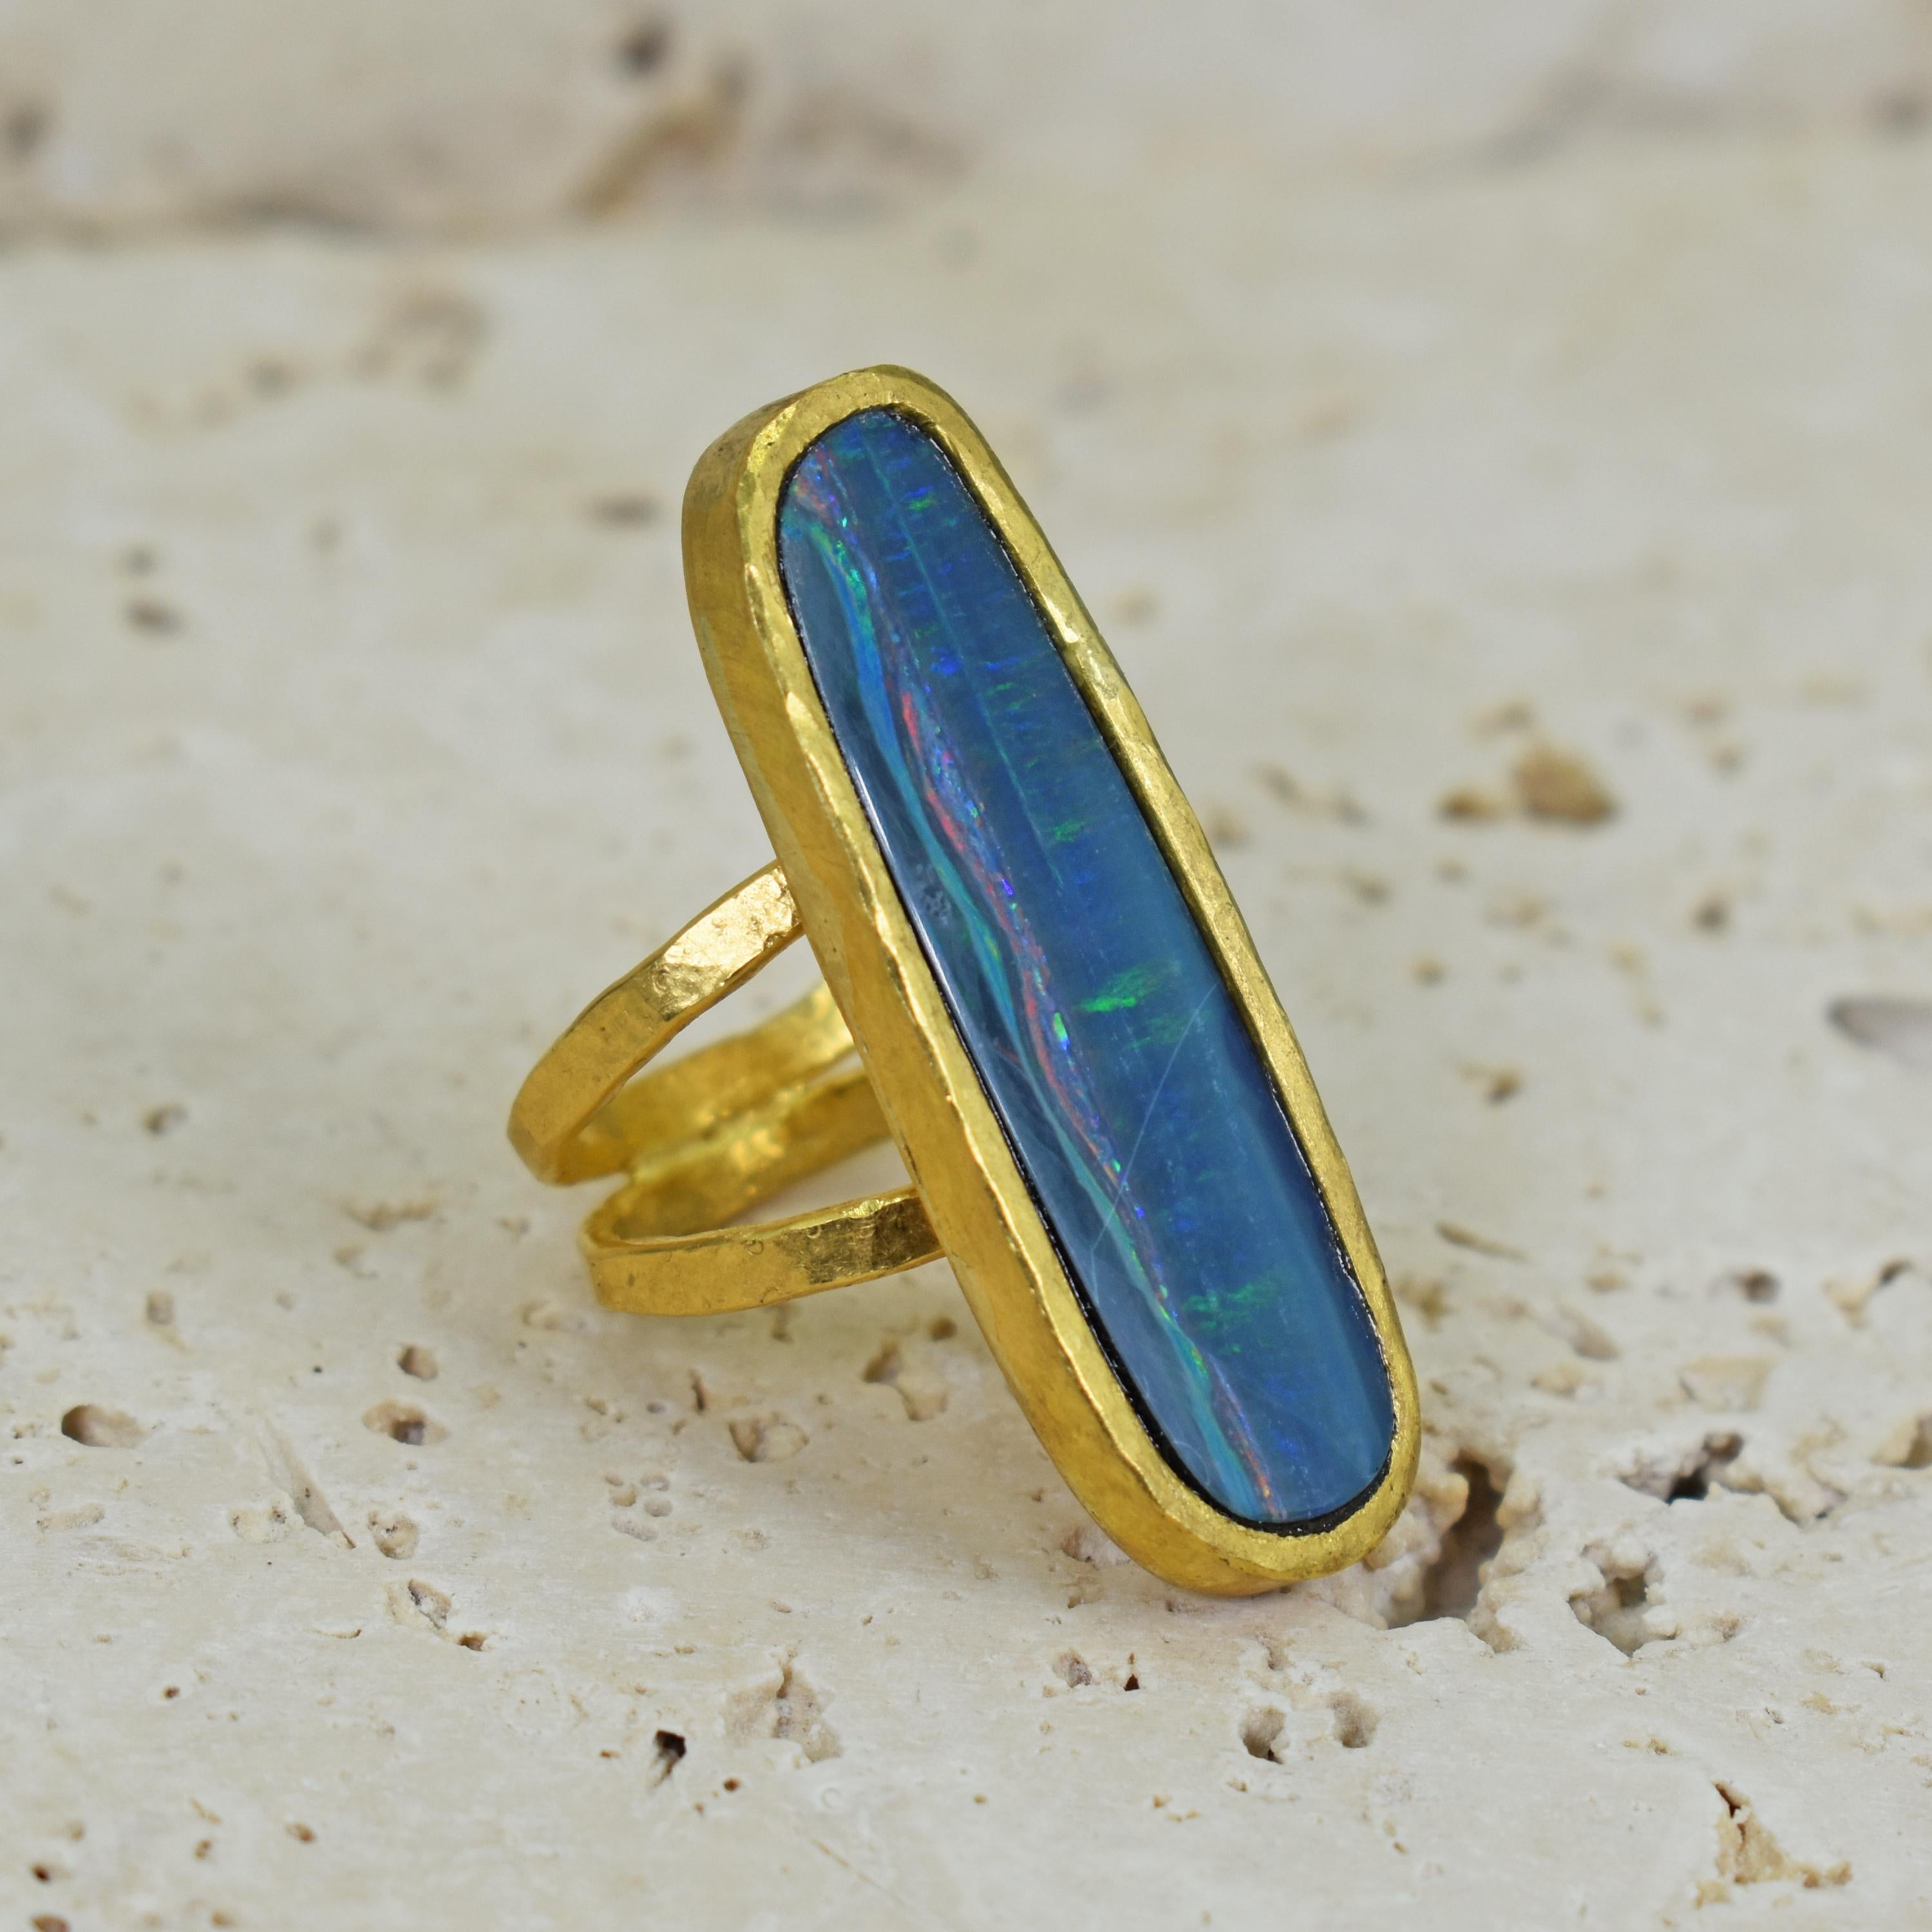 Australian Boulder Opal and solid 22k hand forged yellow gold solitaire cocktail ring with a split shank design. This stunning, elongated blue Opal with rainbow flashes paired with the hammered, high karat gold fuses old world jewelry crafting